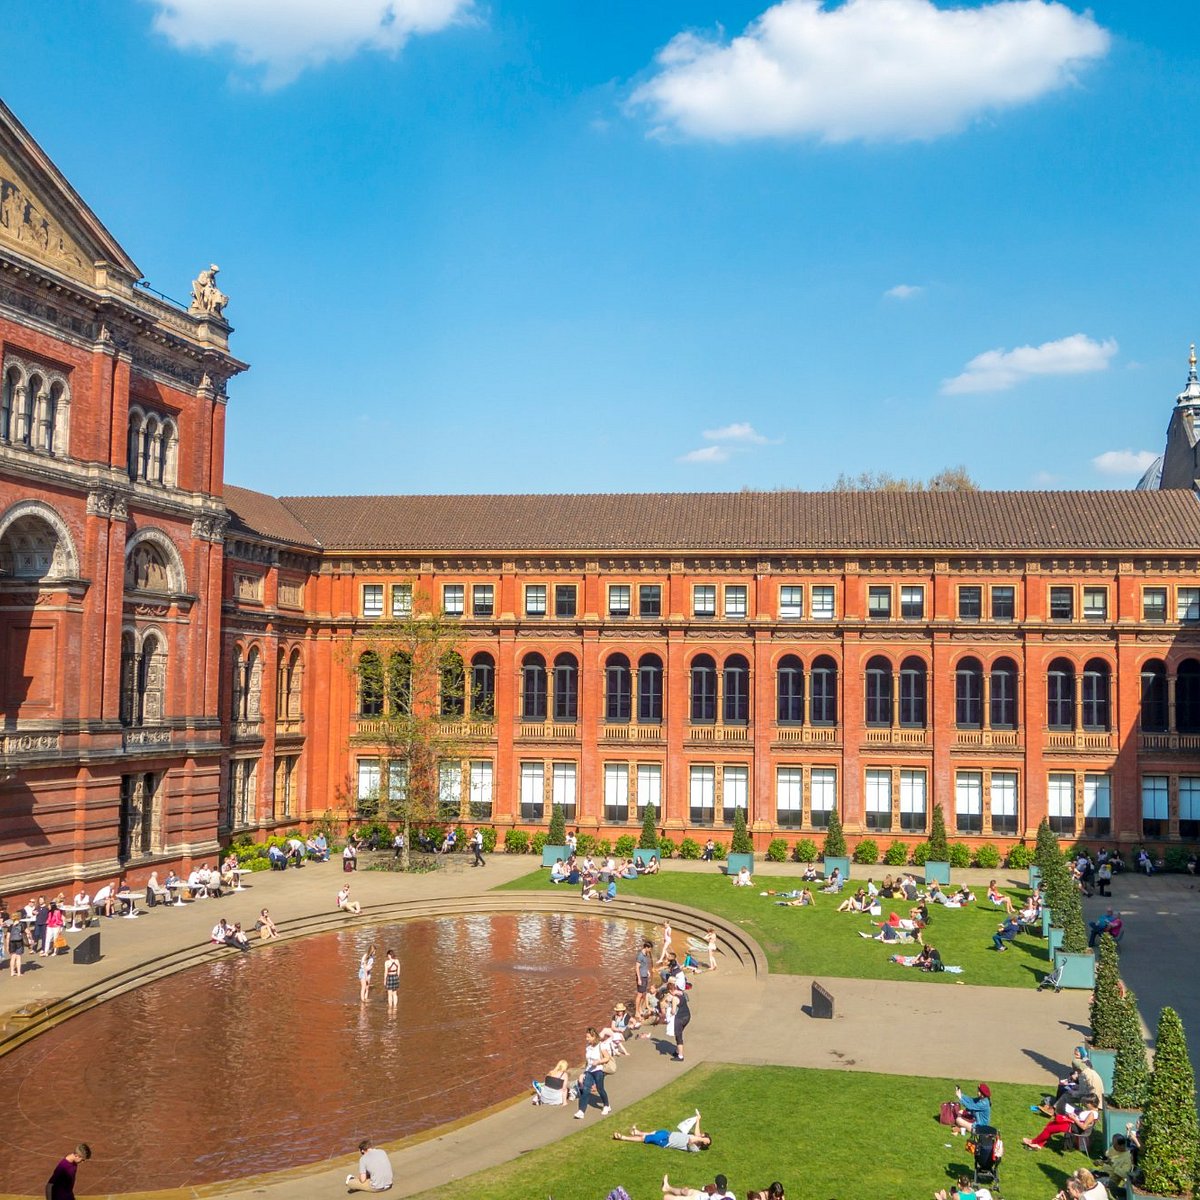 10 things to see at the Victoria and Albert Museum - You in London